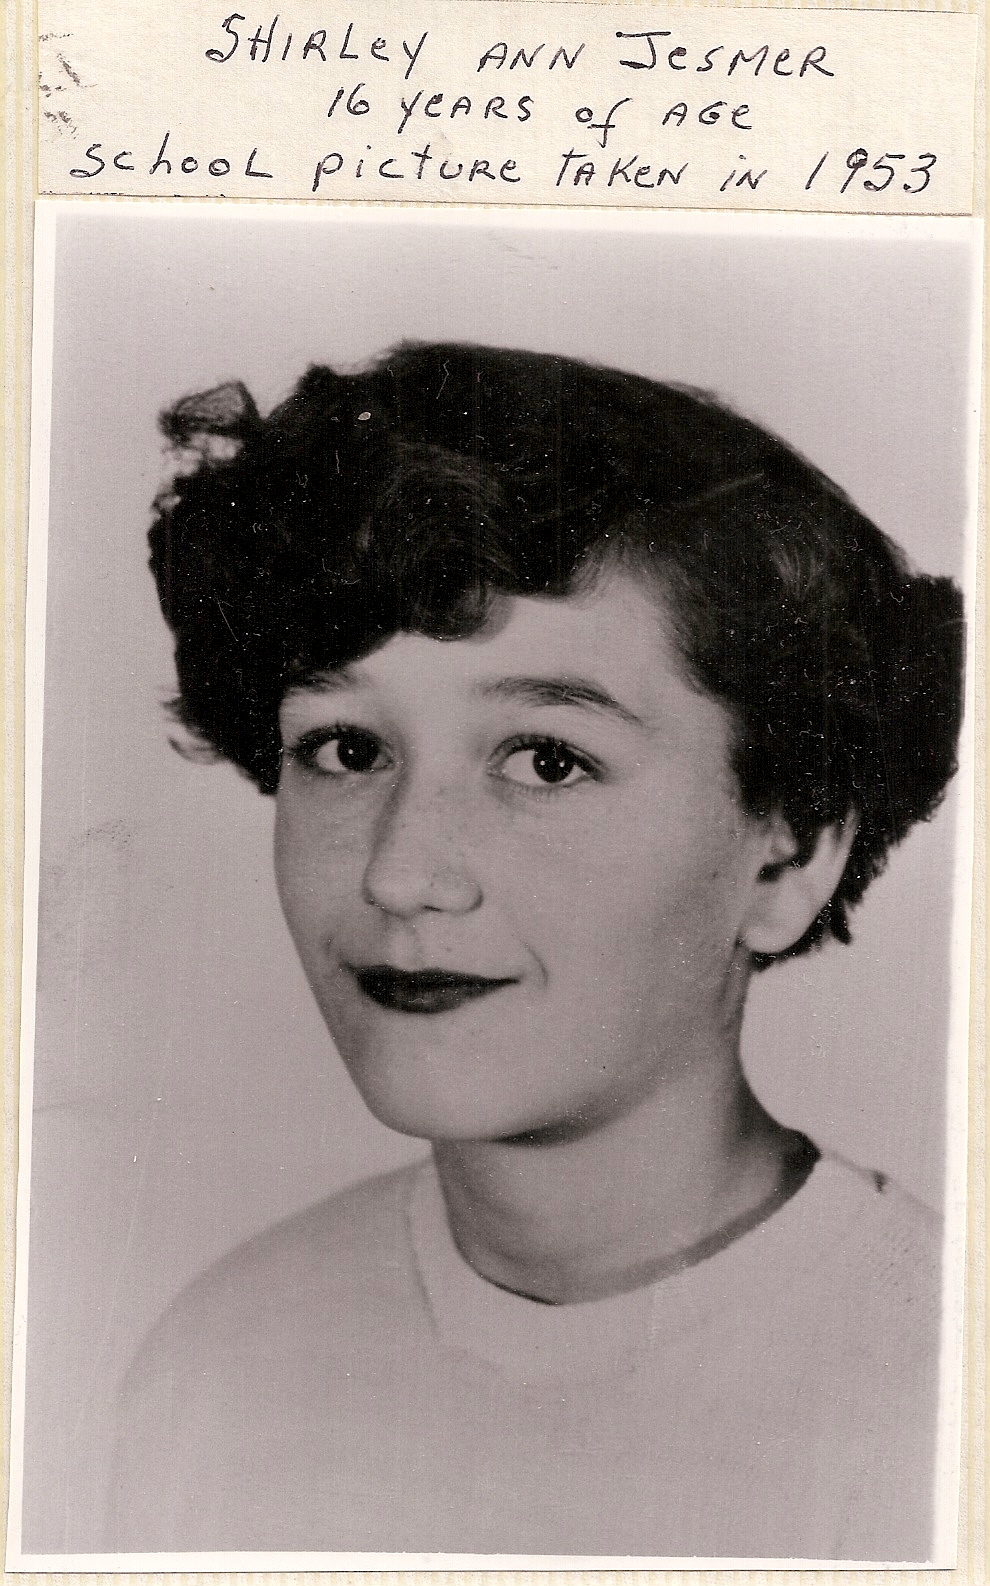 Shirley at 16 in 1953